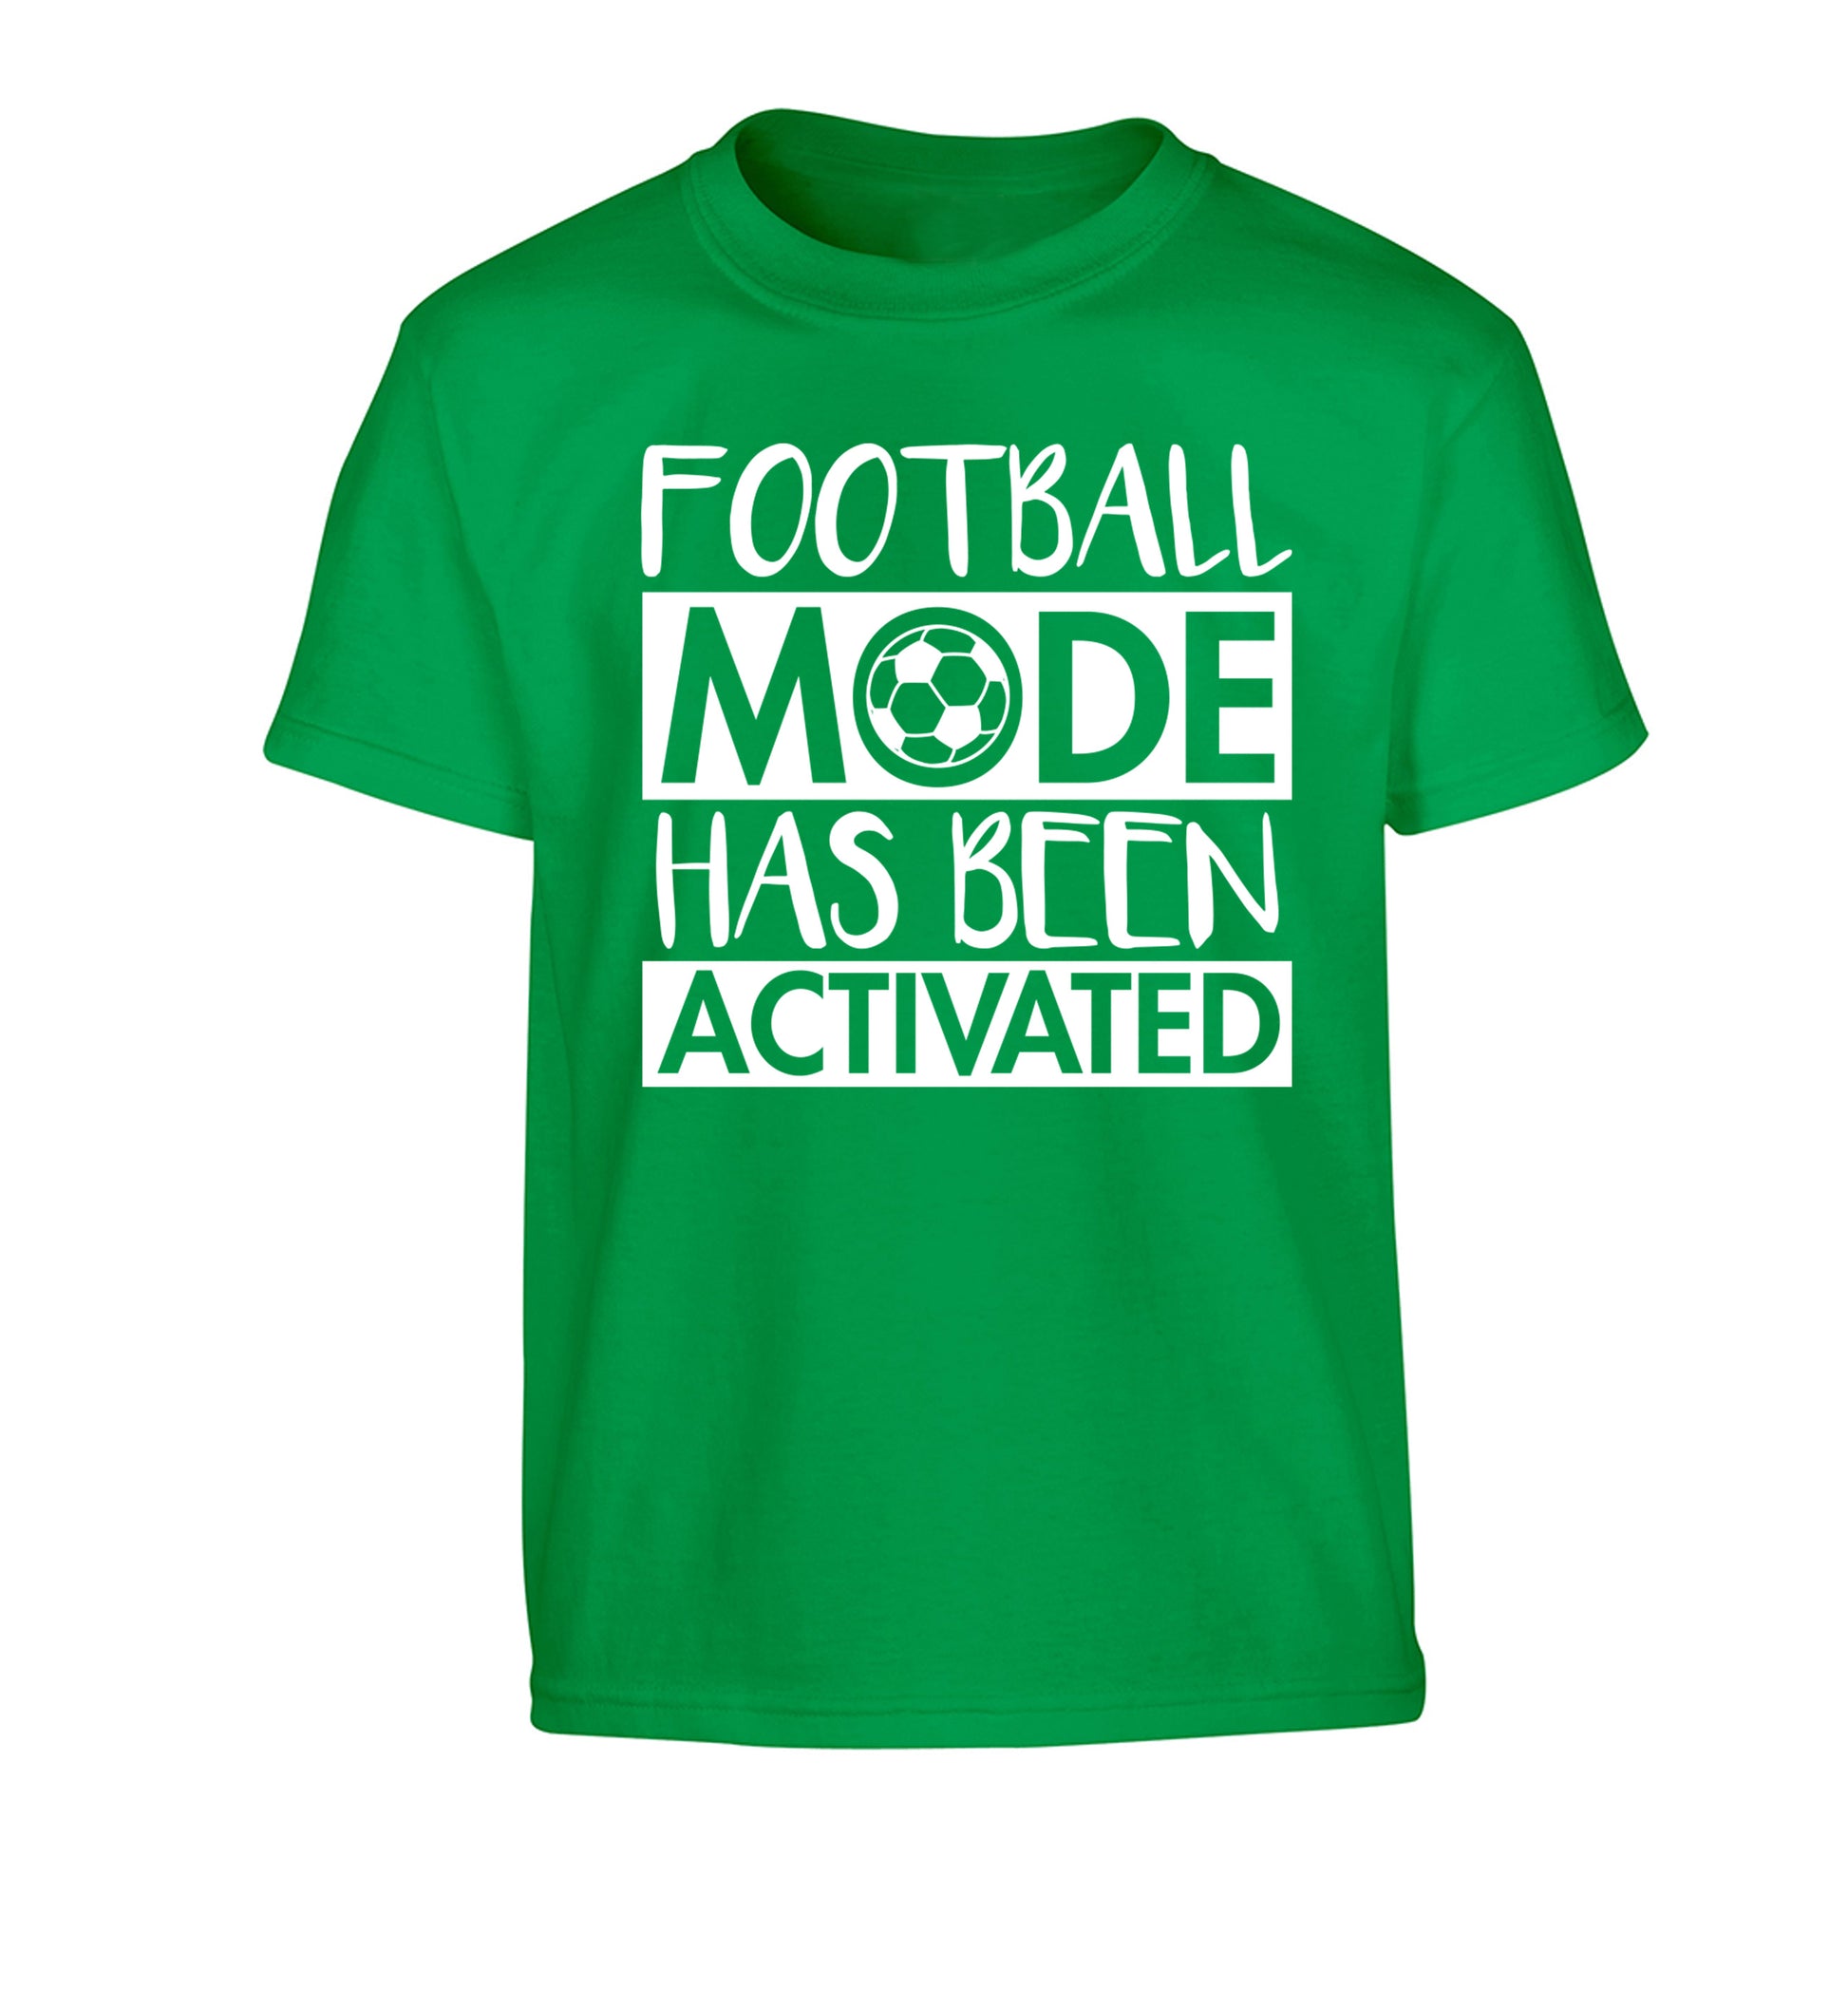 Football mode has been activated Children's green Tshirt 12-14 Years